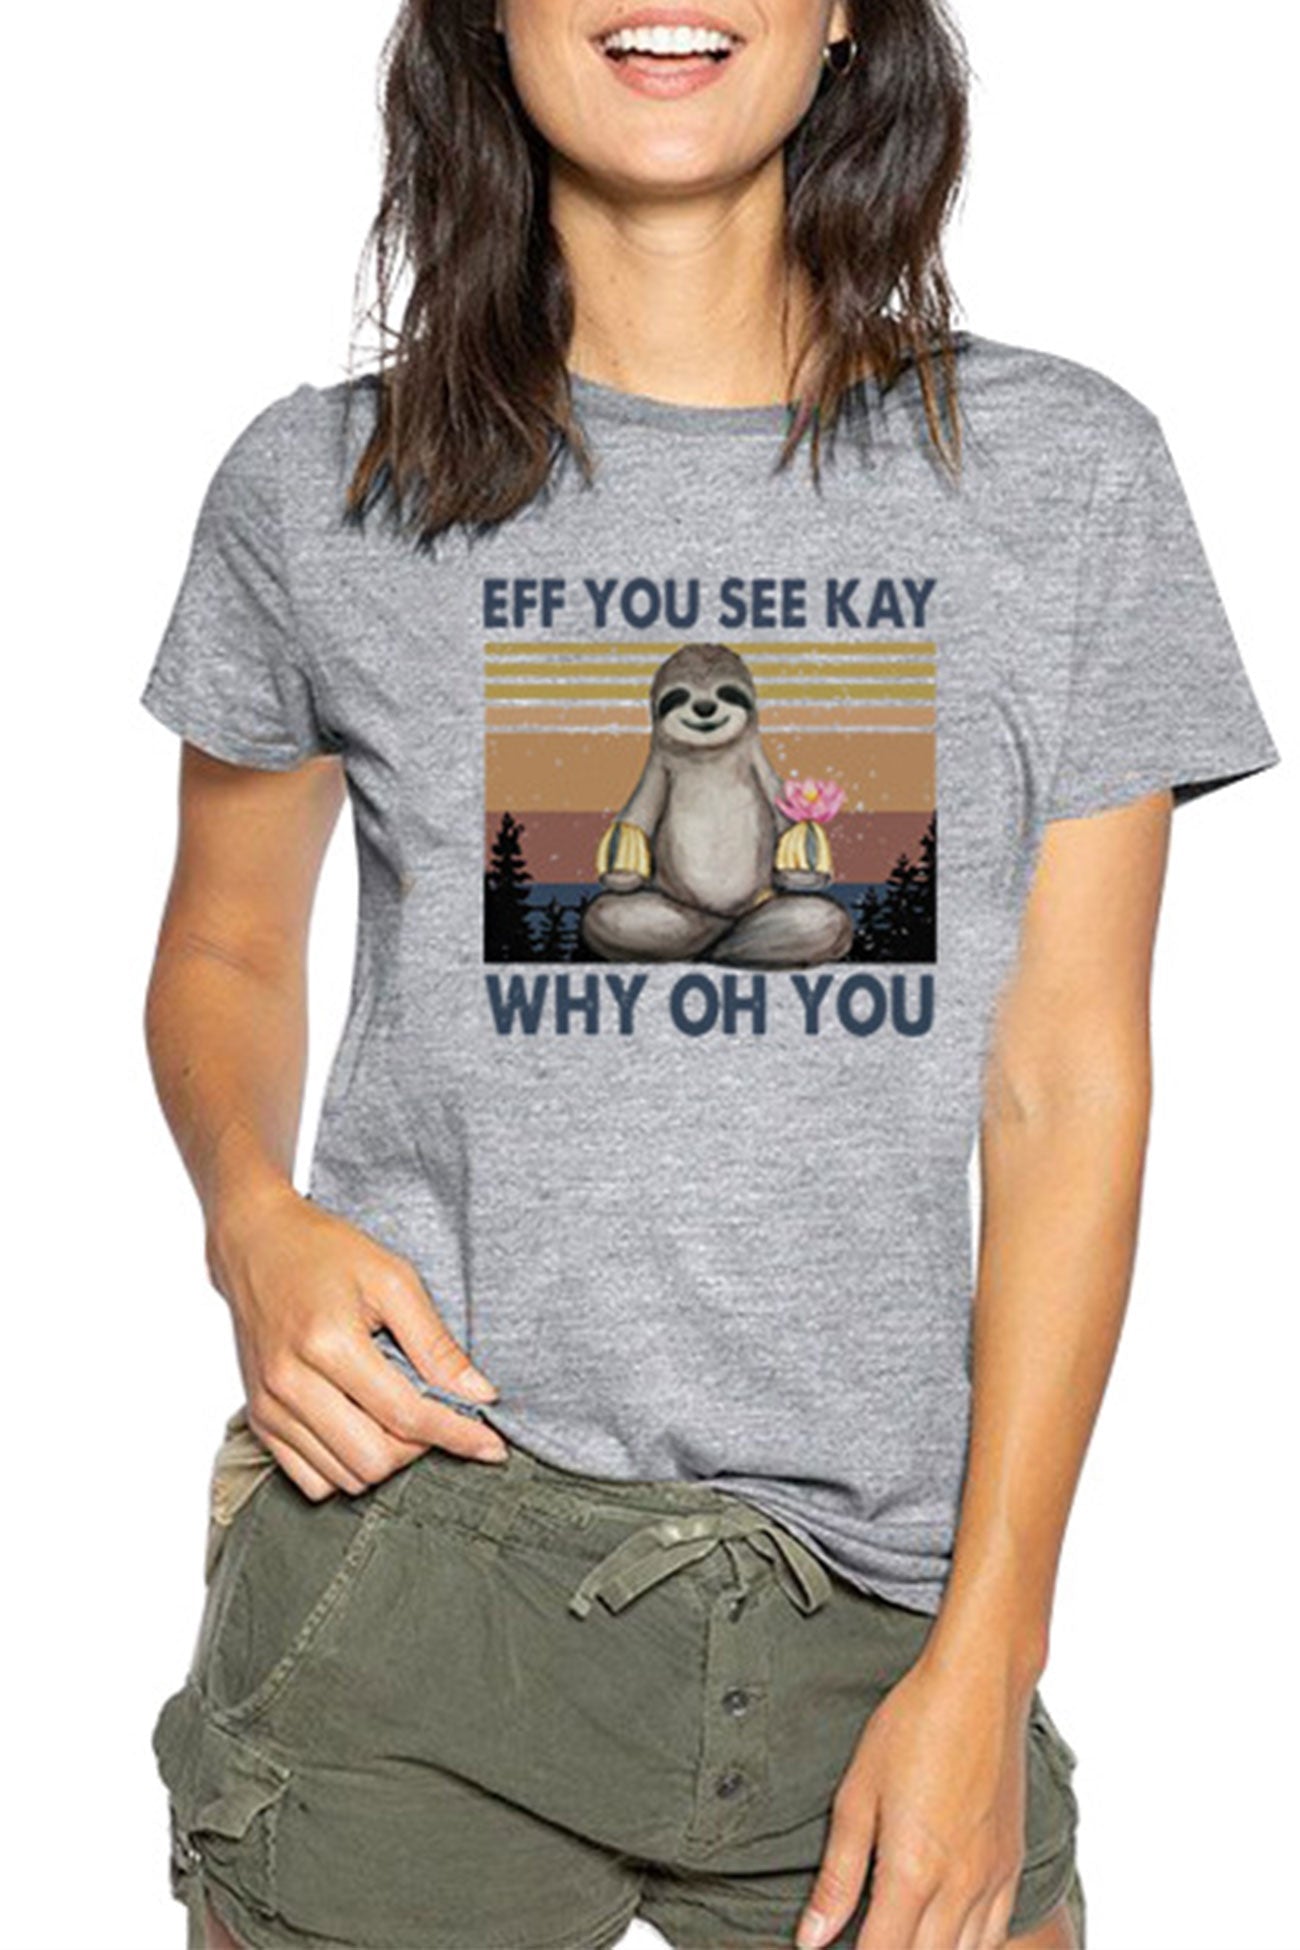 Eff You See Kay Why Oh You T-shirt